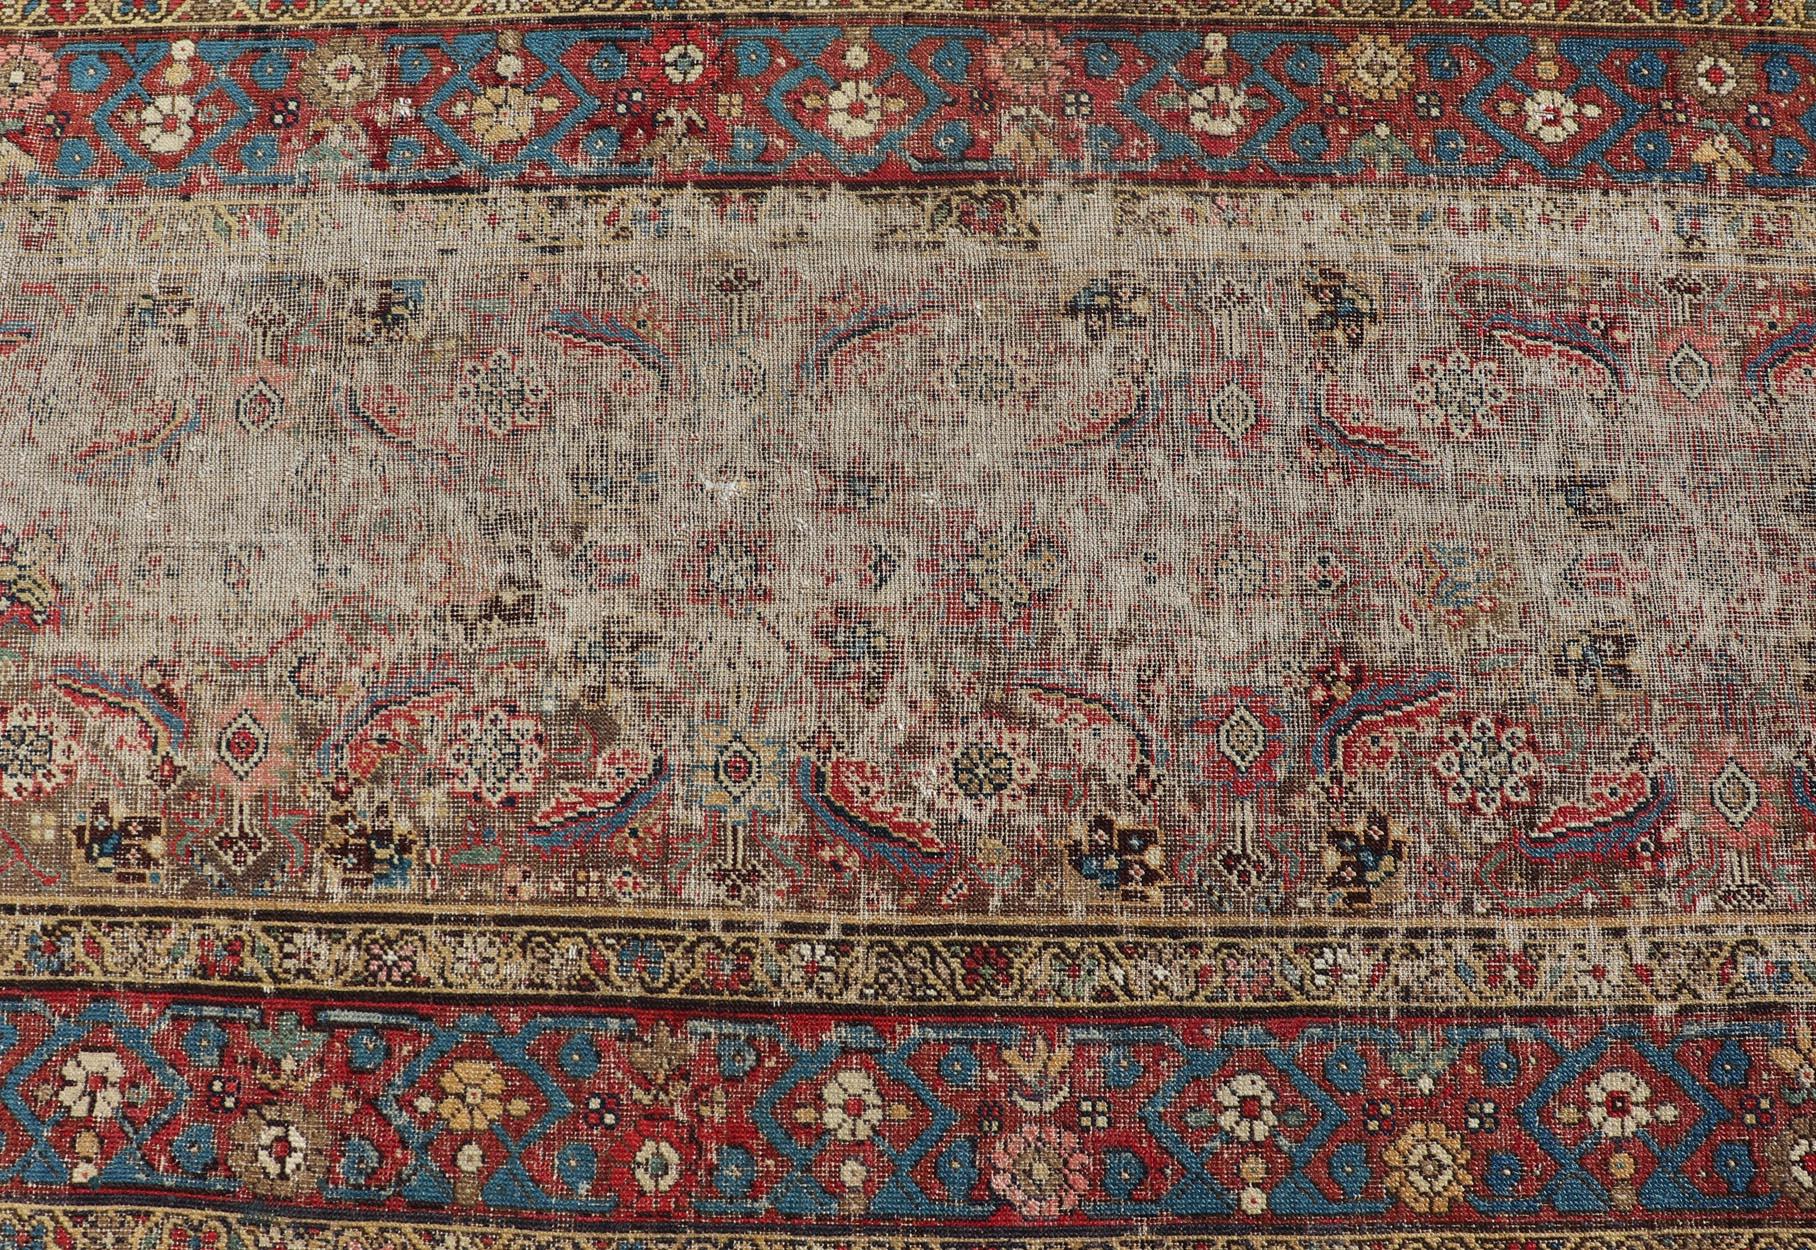 This exquisite antique hand-knotted distressed Persian Sultanabad runner features an all-over sub-geometric floral design replete in jewel tones and enclosed within a complementary, multi-tiered border; making this rug a perfect fit for a variety of